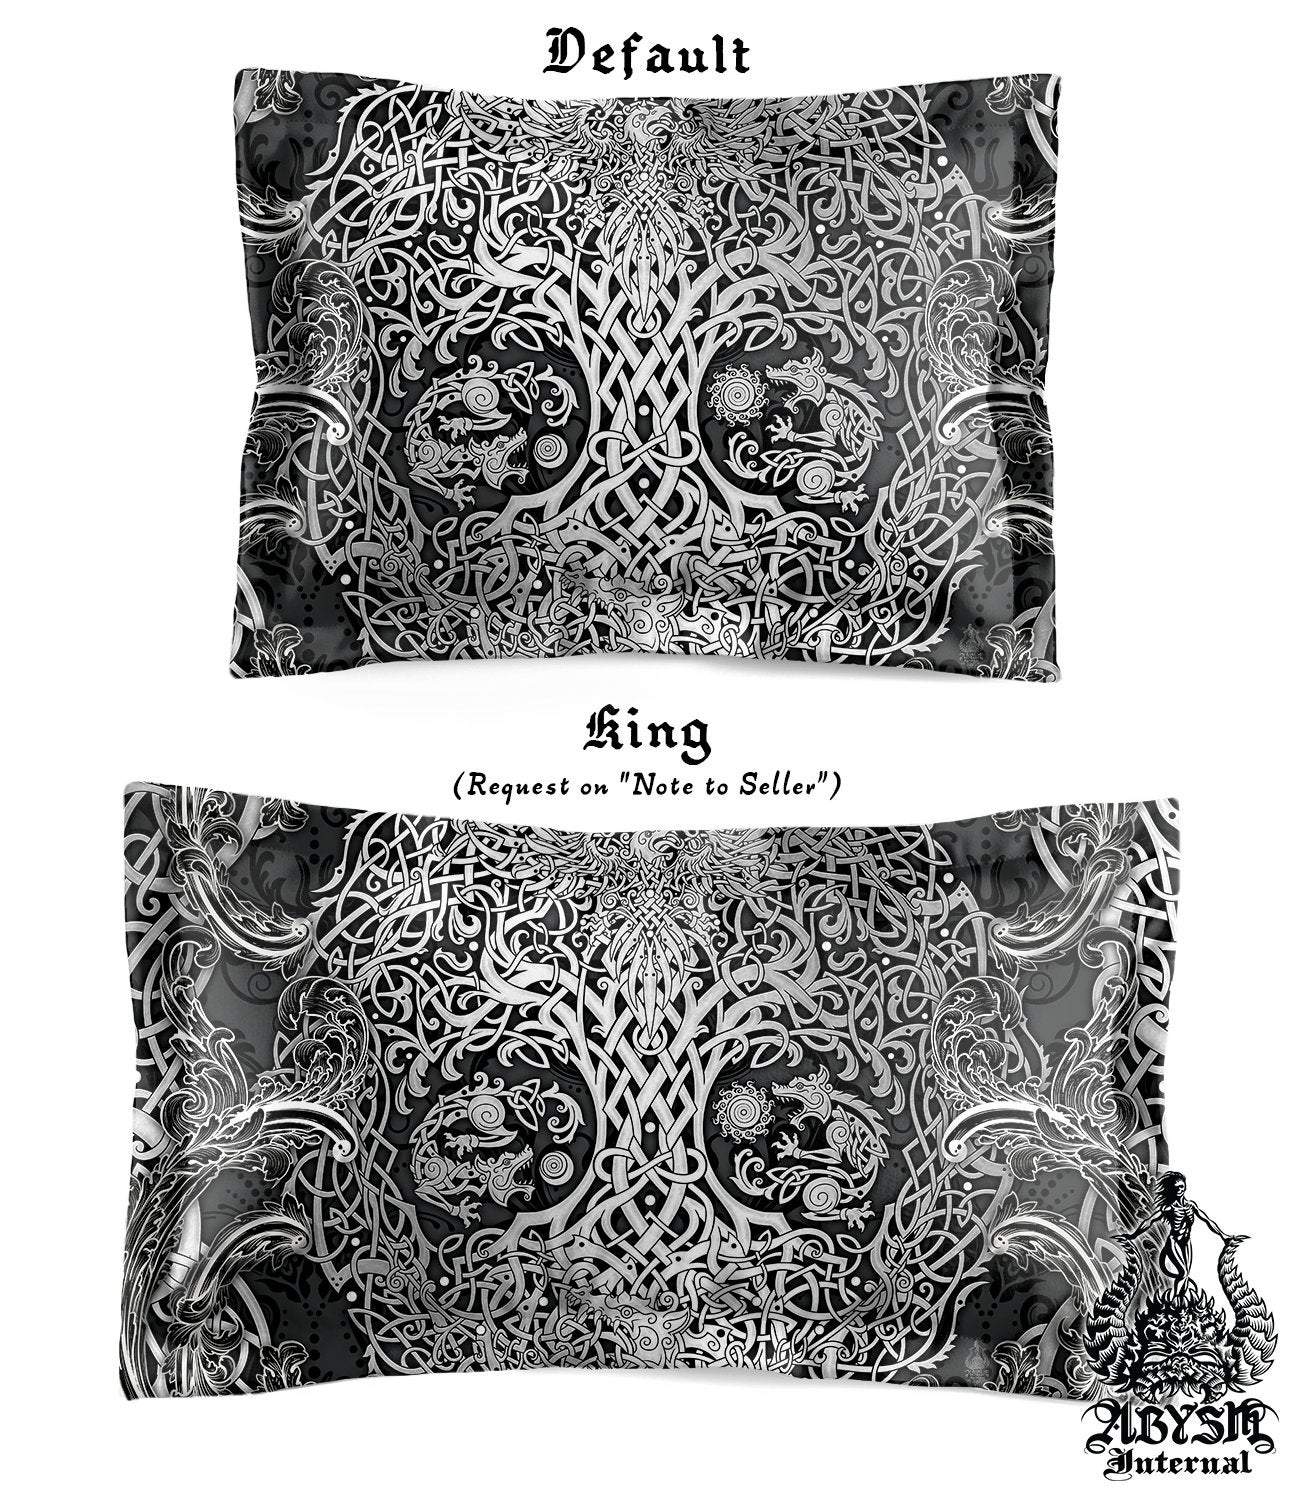 Viking Bedding Set, Comforter and Duvet, Yggdrasil Bed Cover and Bedroom Decor, Norse Art, King, Queen and Twin Size - Dark - Abysm Internal